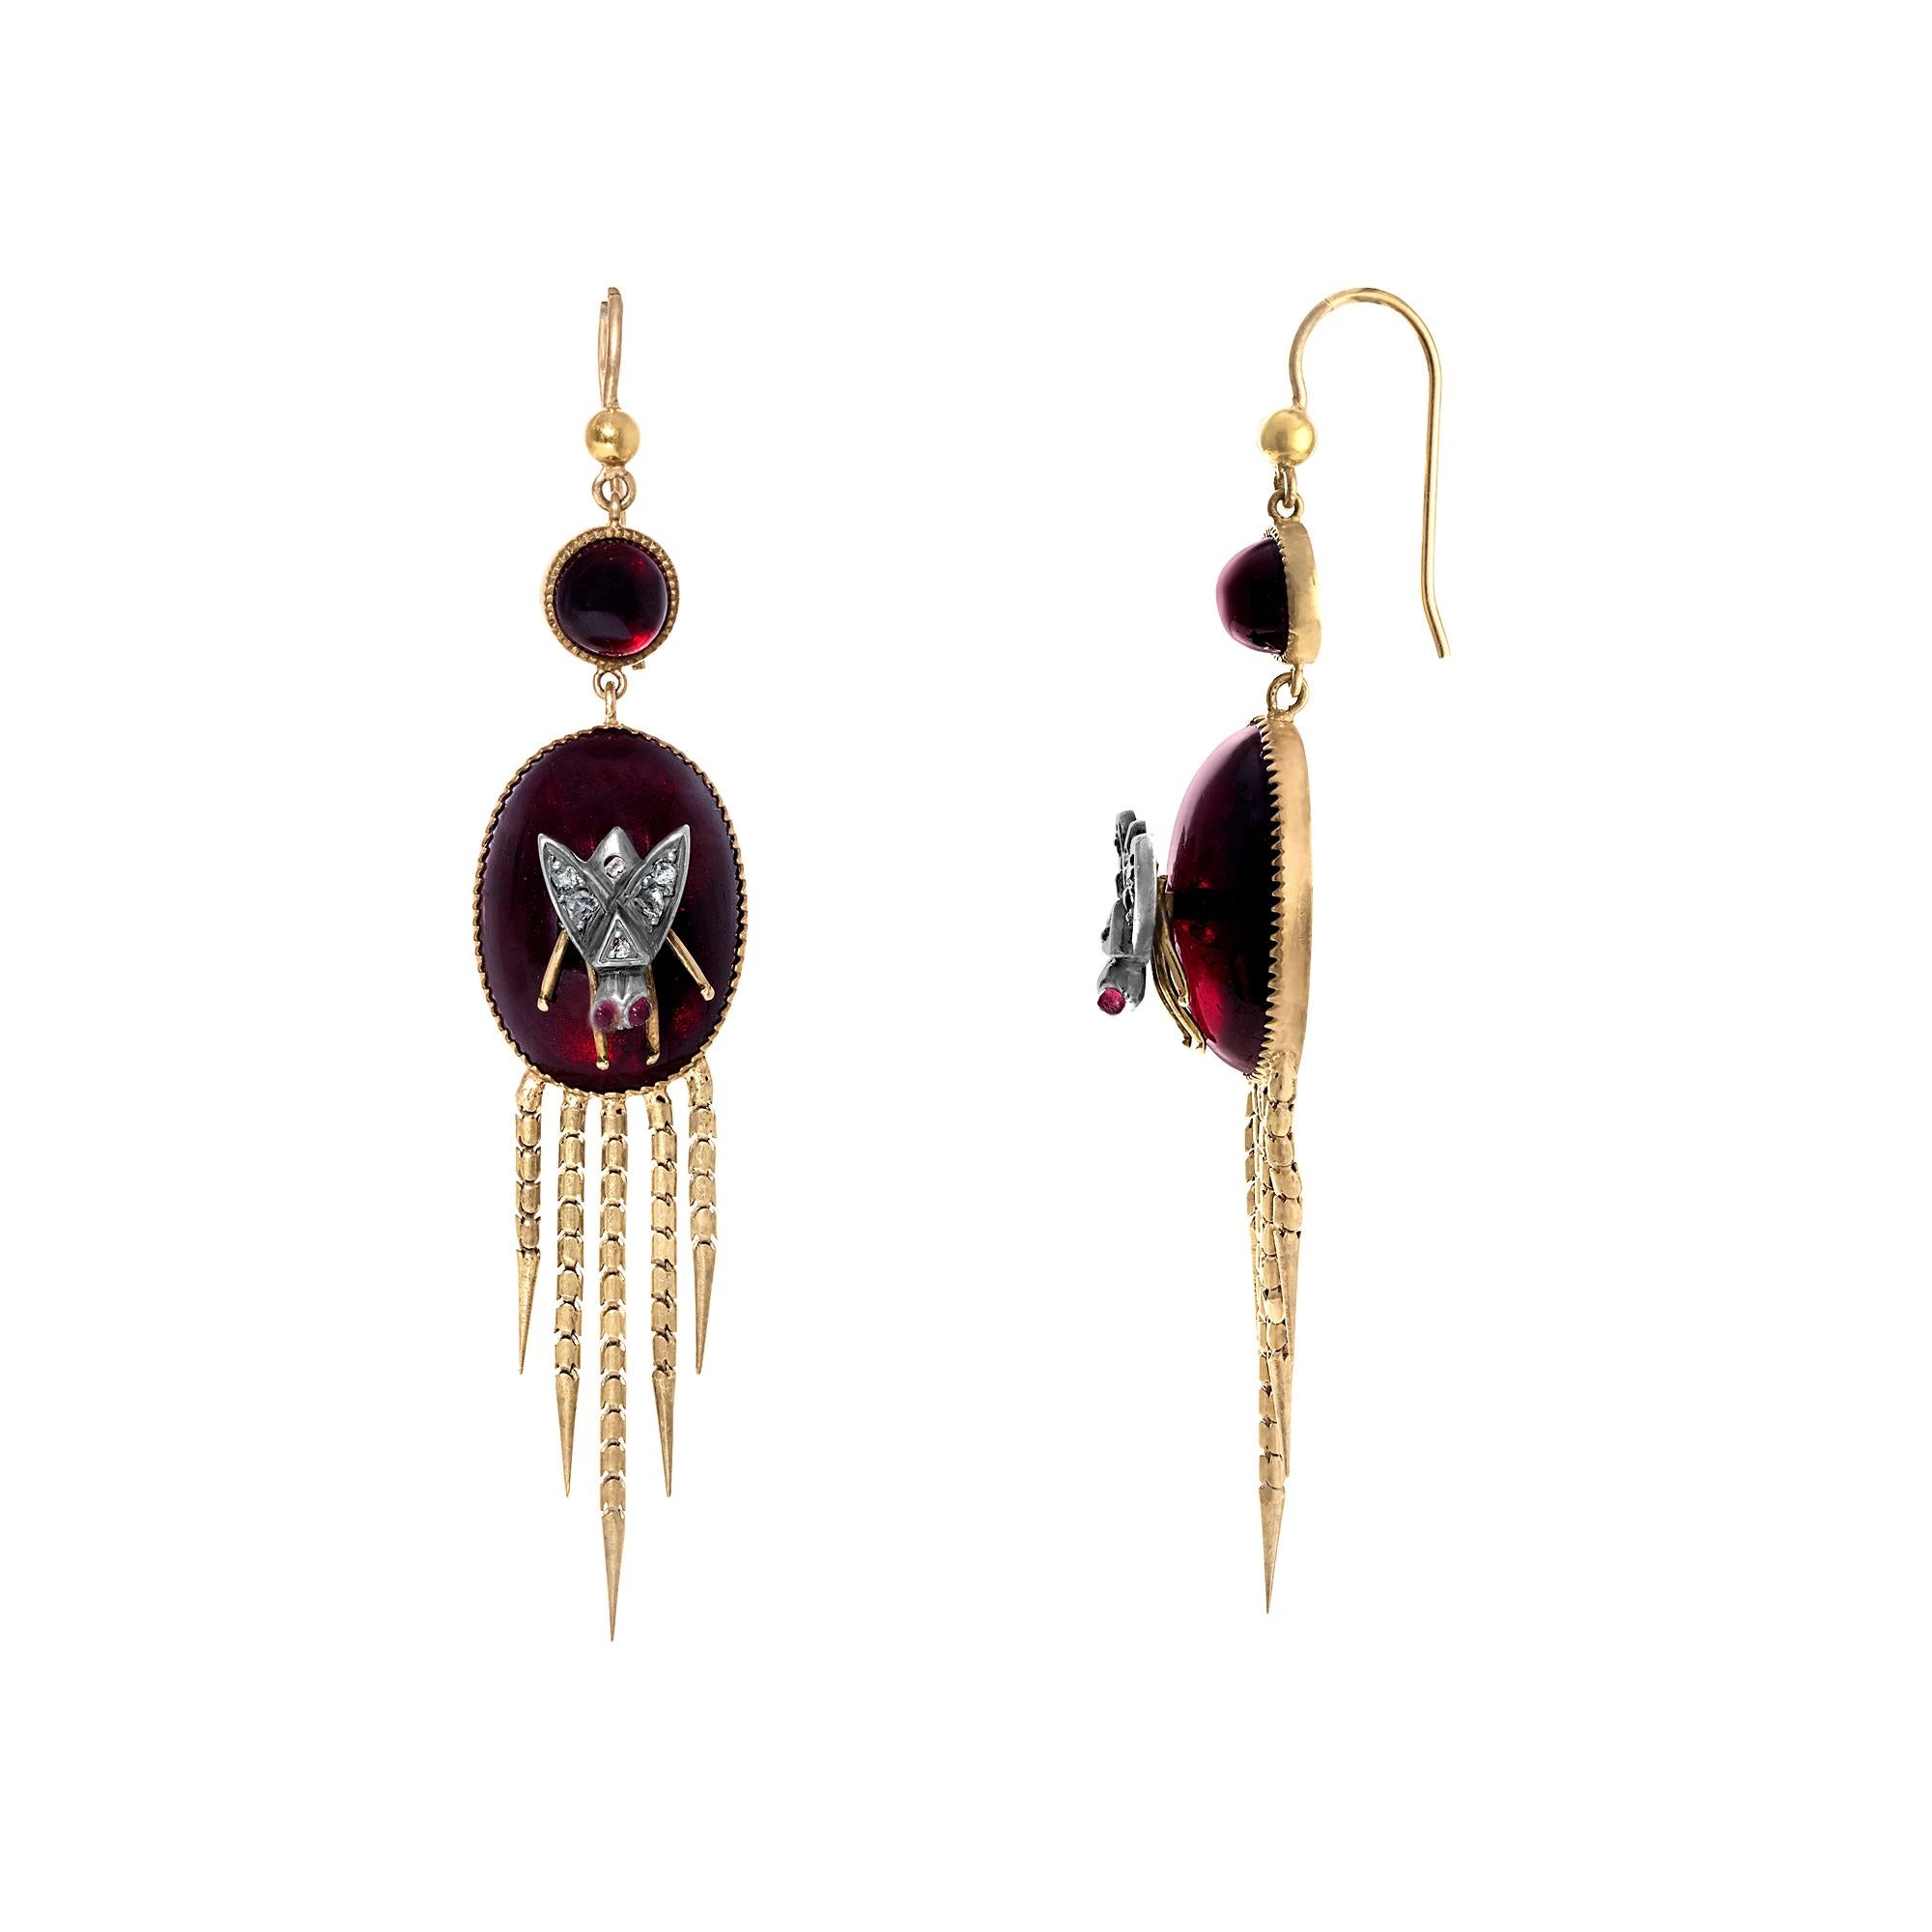 English Victorian Fringed Earrings with Garnet and Diamonds 2